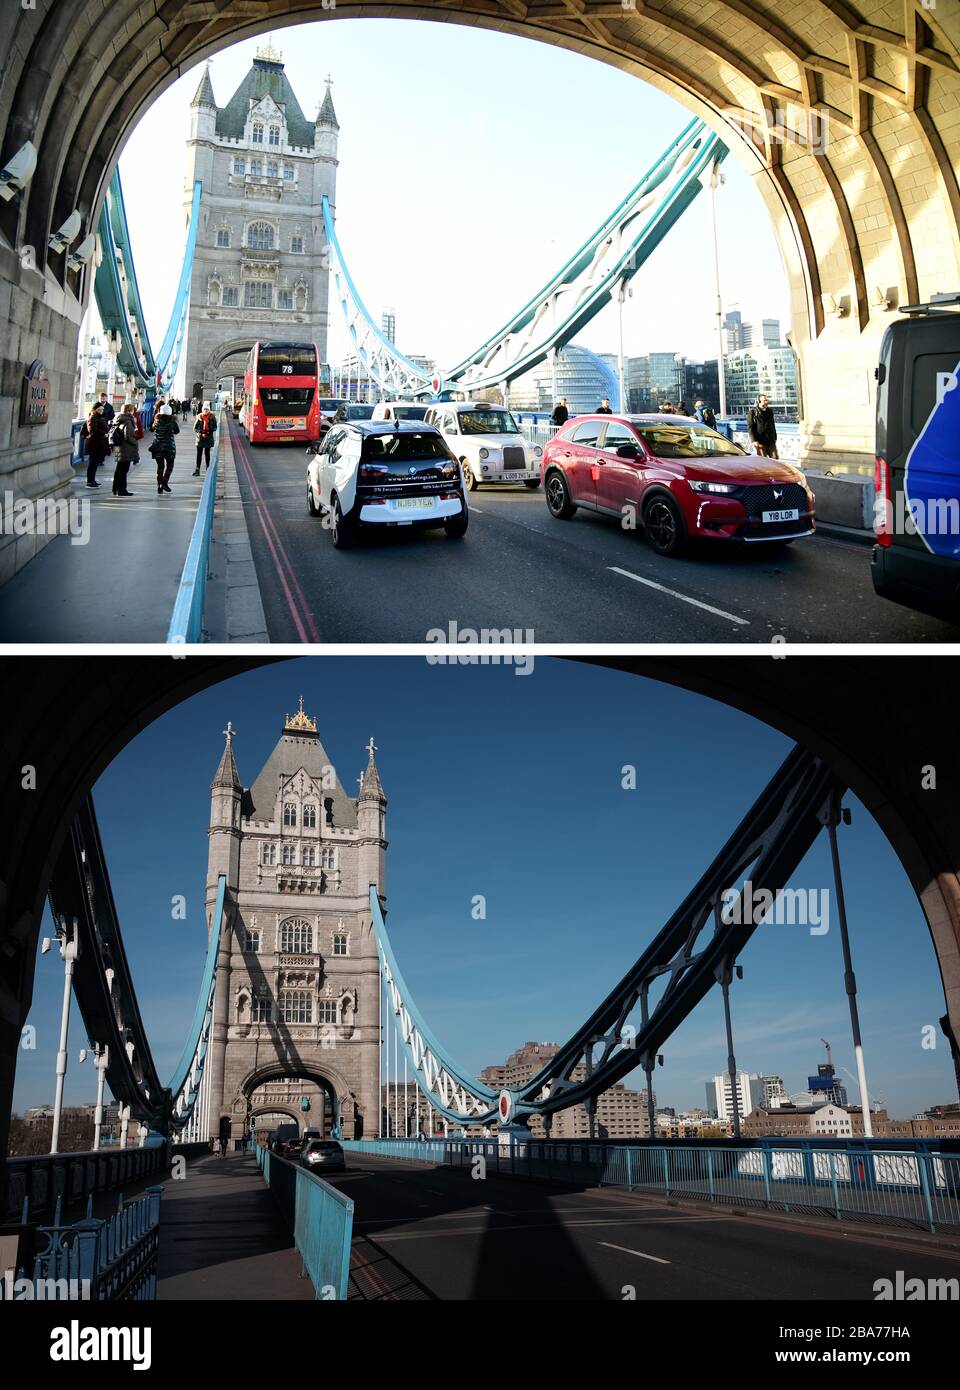 Composite photos of London's Tower Bridge on 16/03/20 (top), and on Tuesday 24/03/20 (bottom), the day after Prime Minister Boris Johnson put the UK in lockdown to help curb the spread of the coronavirus. Stock Photo